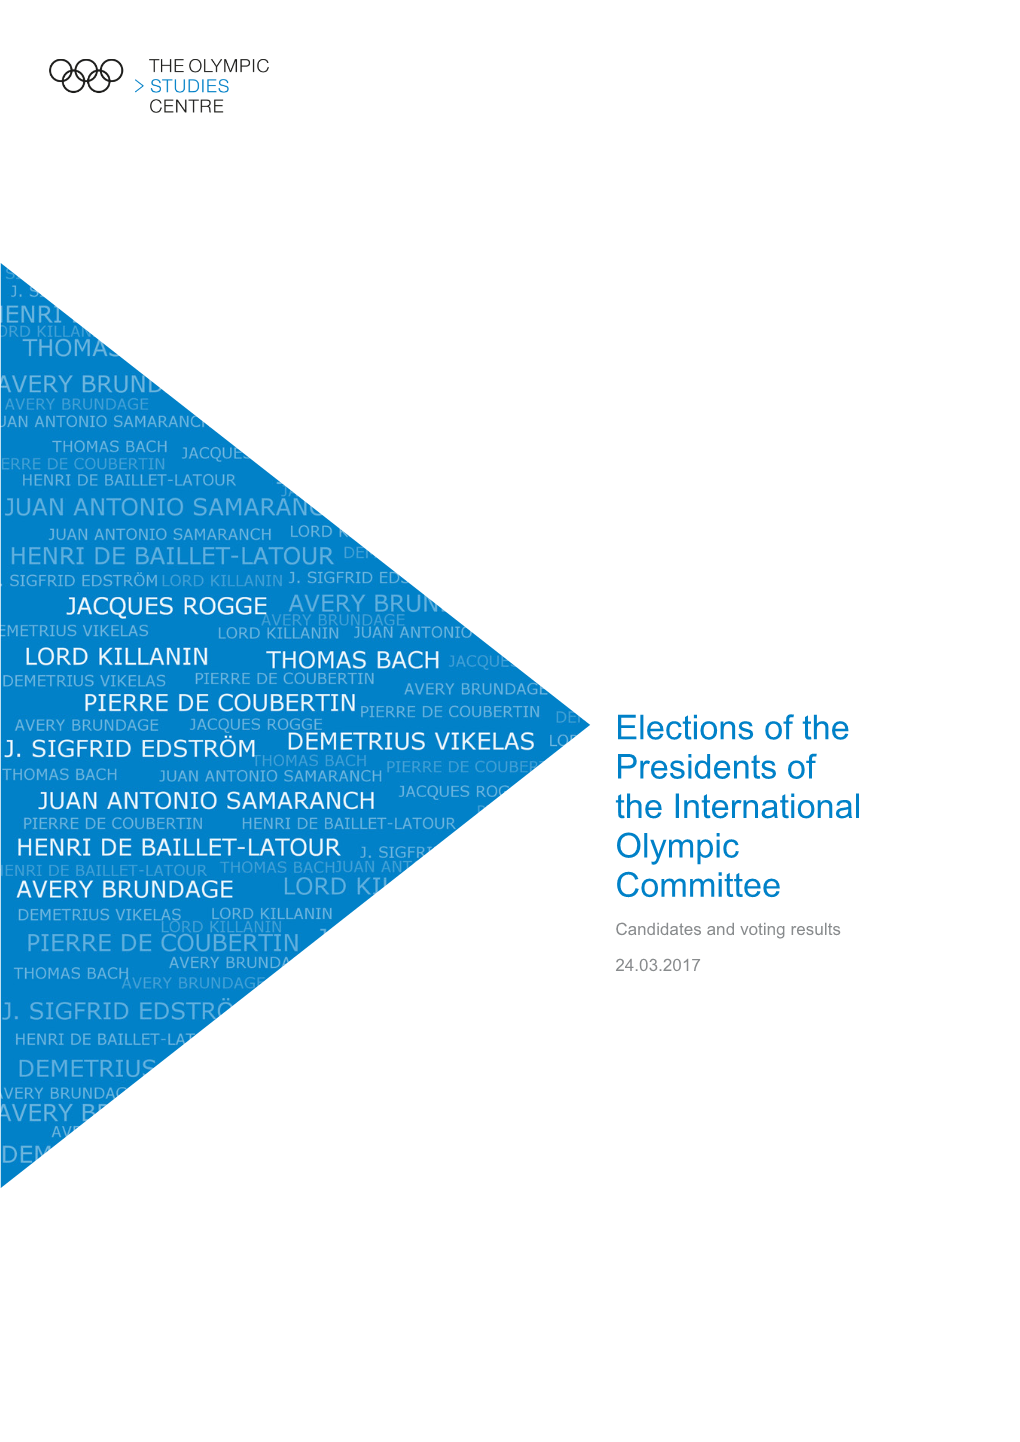 Elections of the Presidents of the International Olympic Committee Candidates and Voting Results